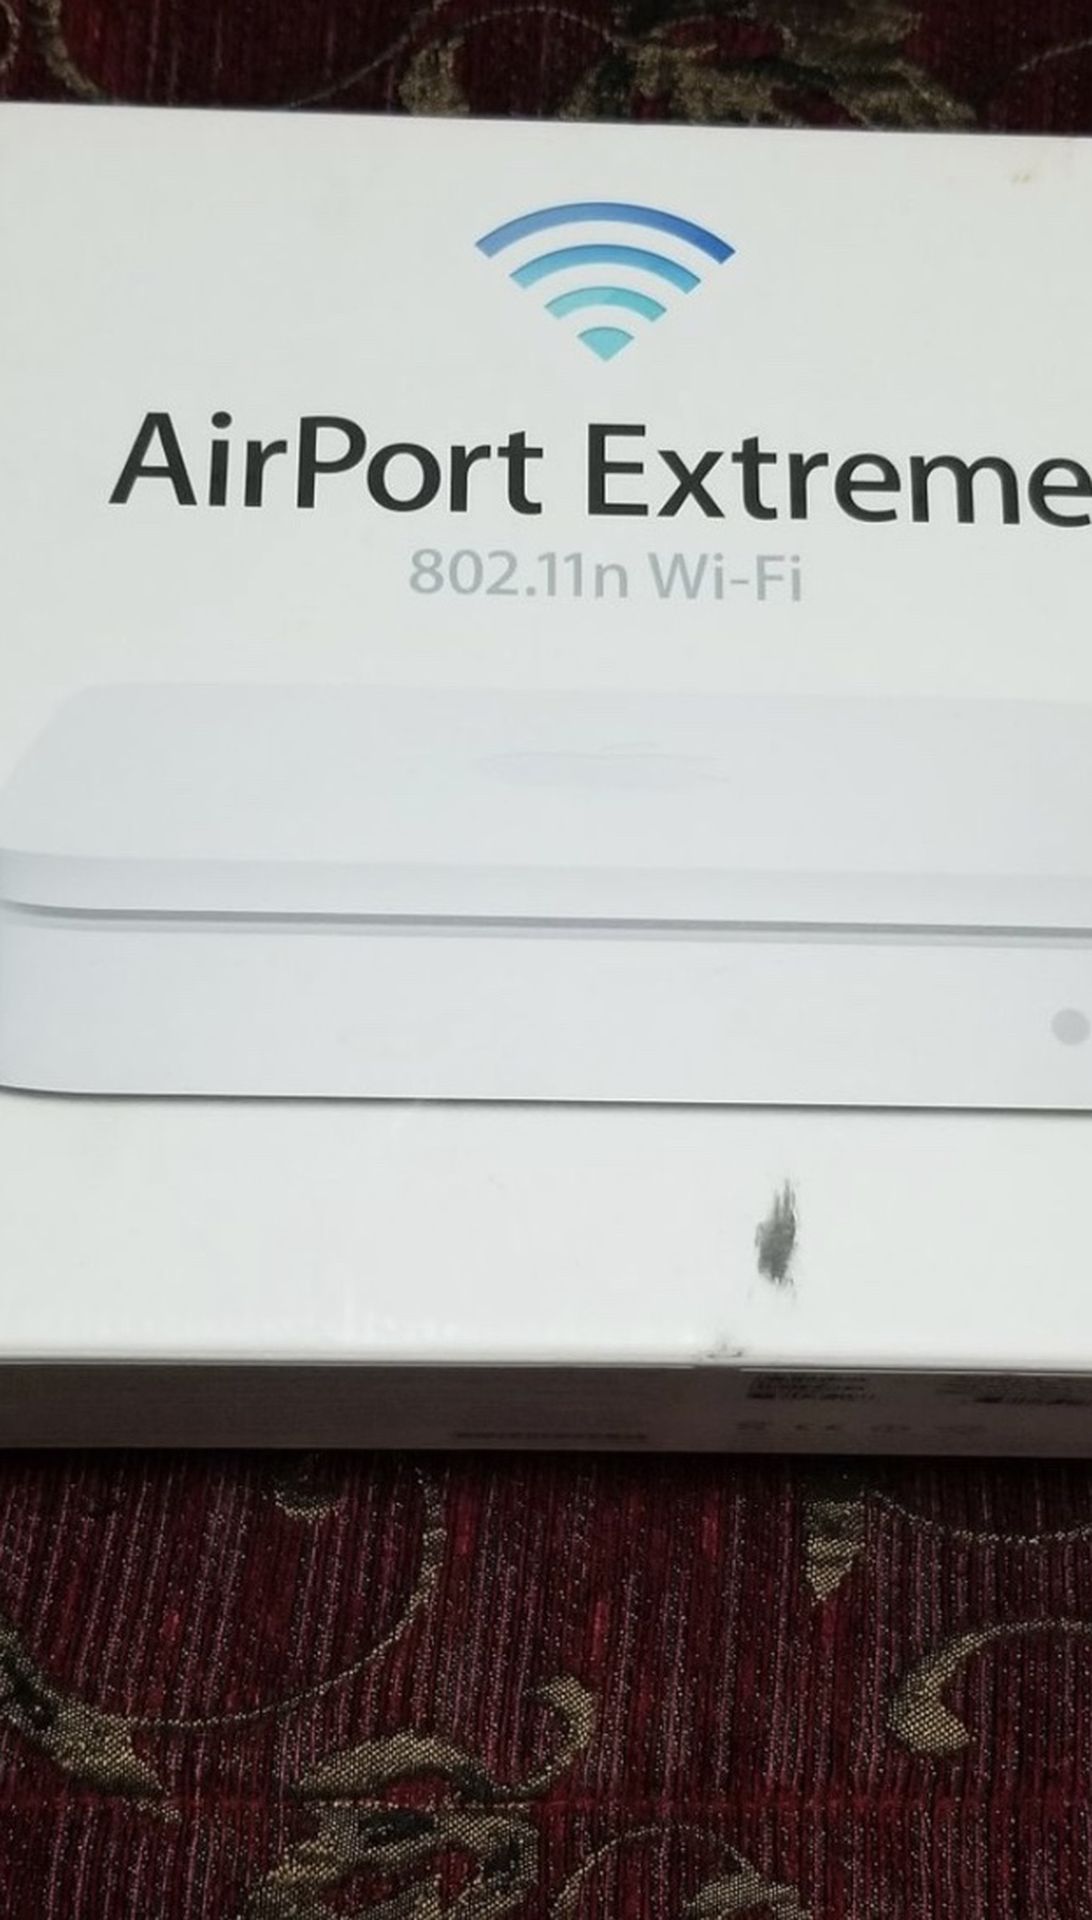 APPLE AIRPORT EXTREME BASE STATION